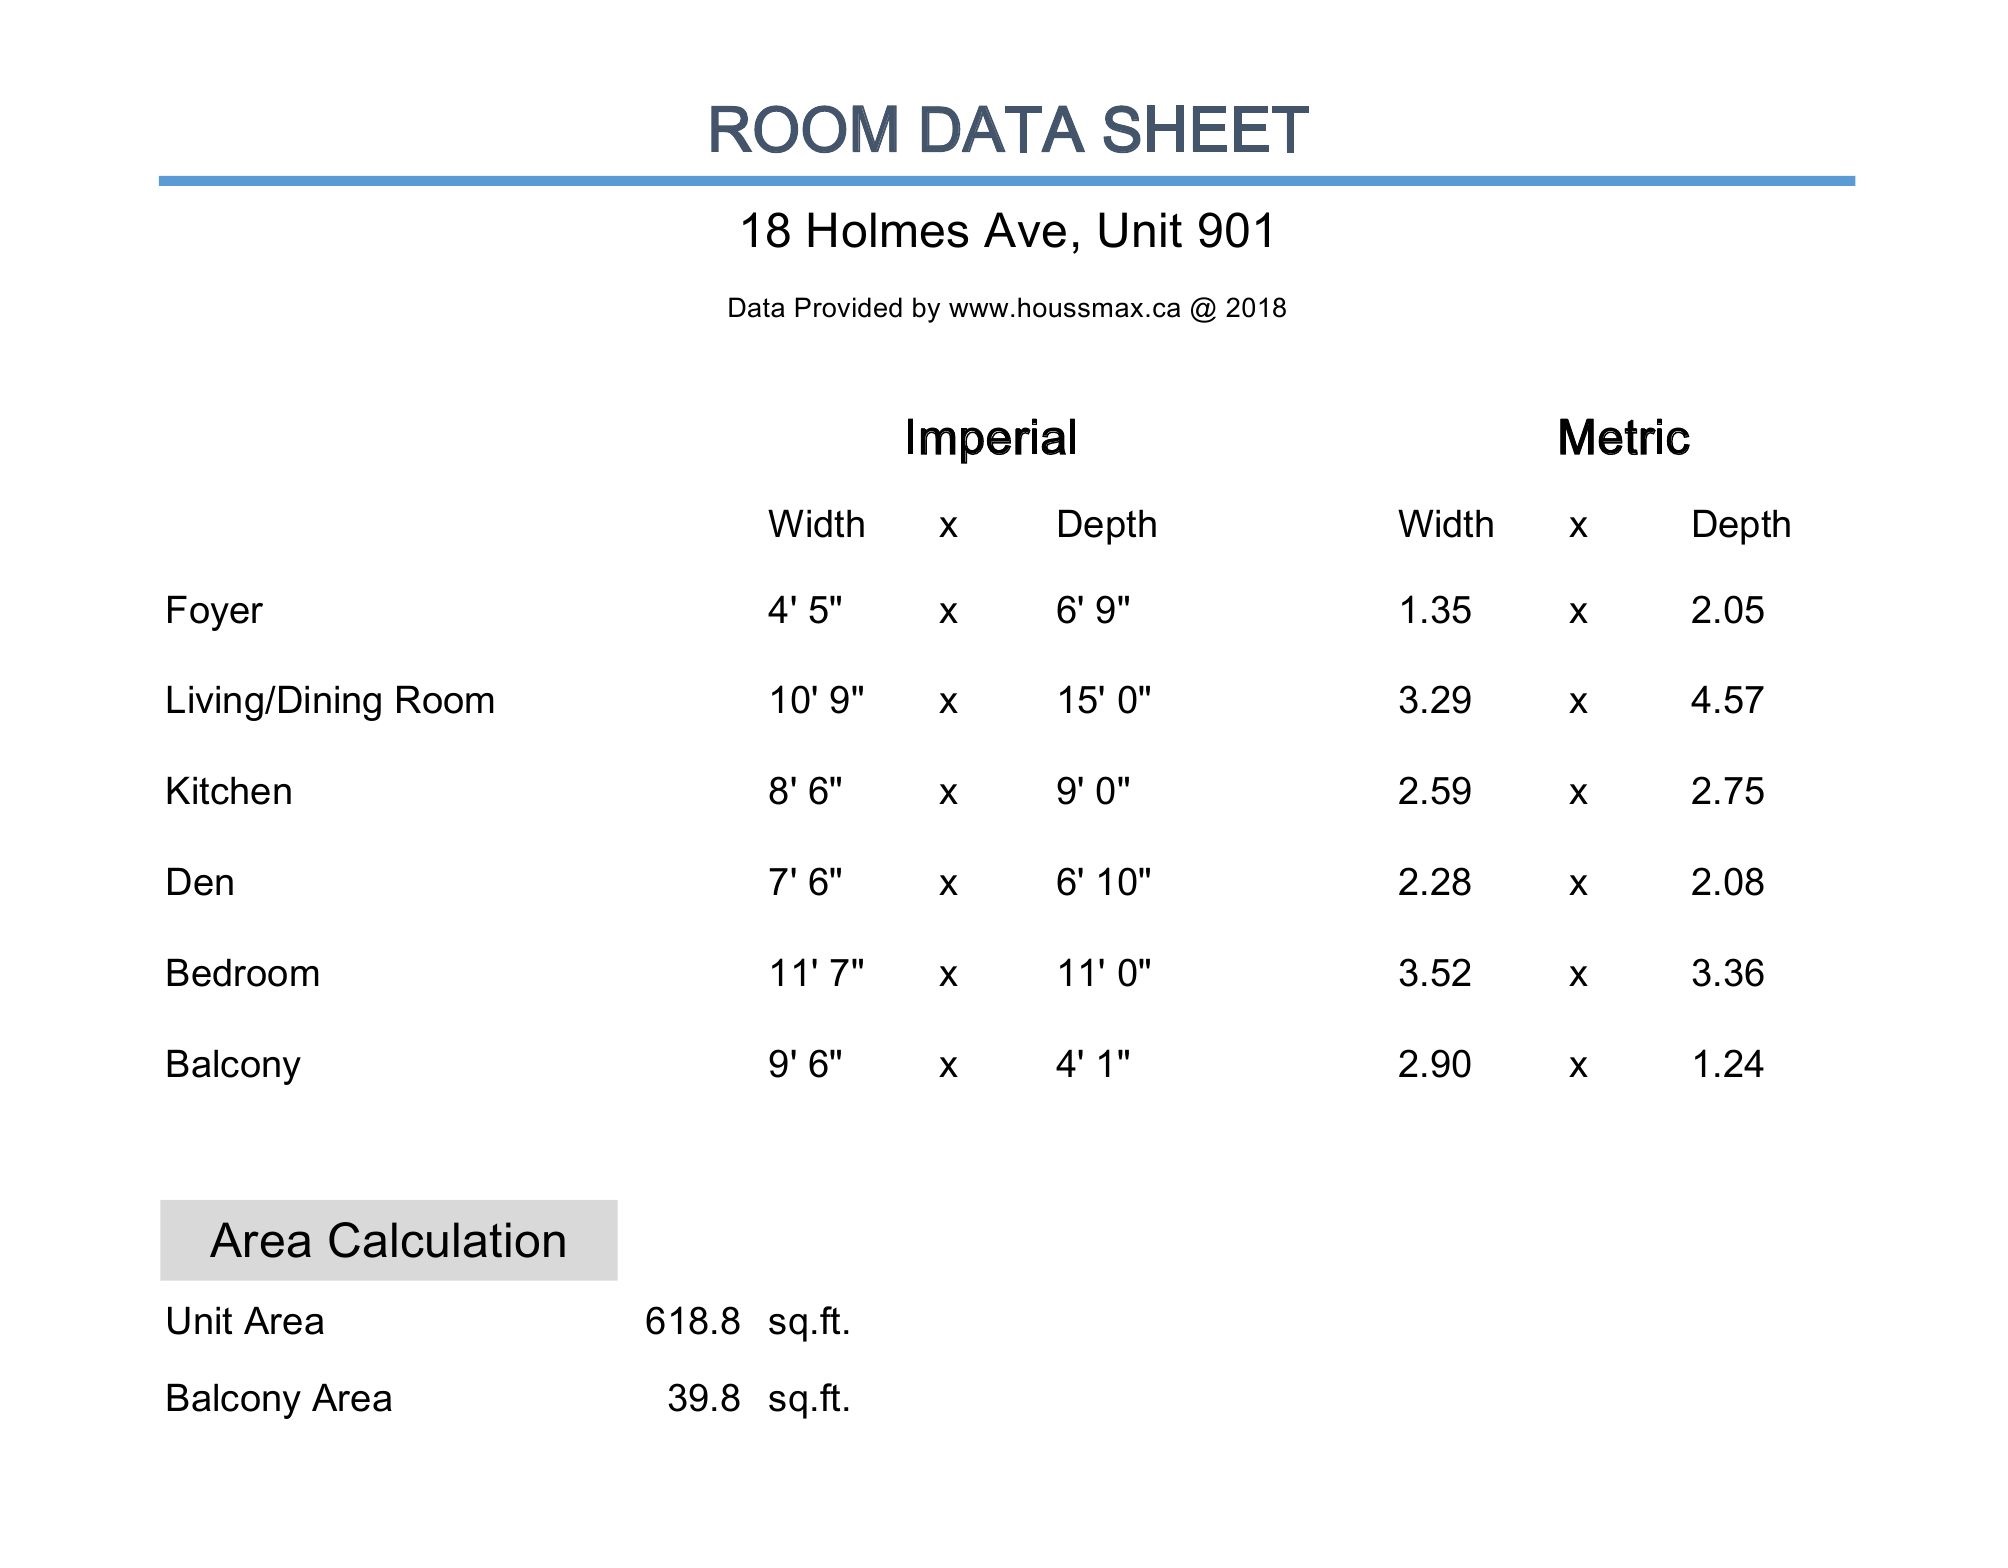 Measurements and room sizes.